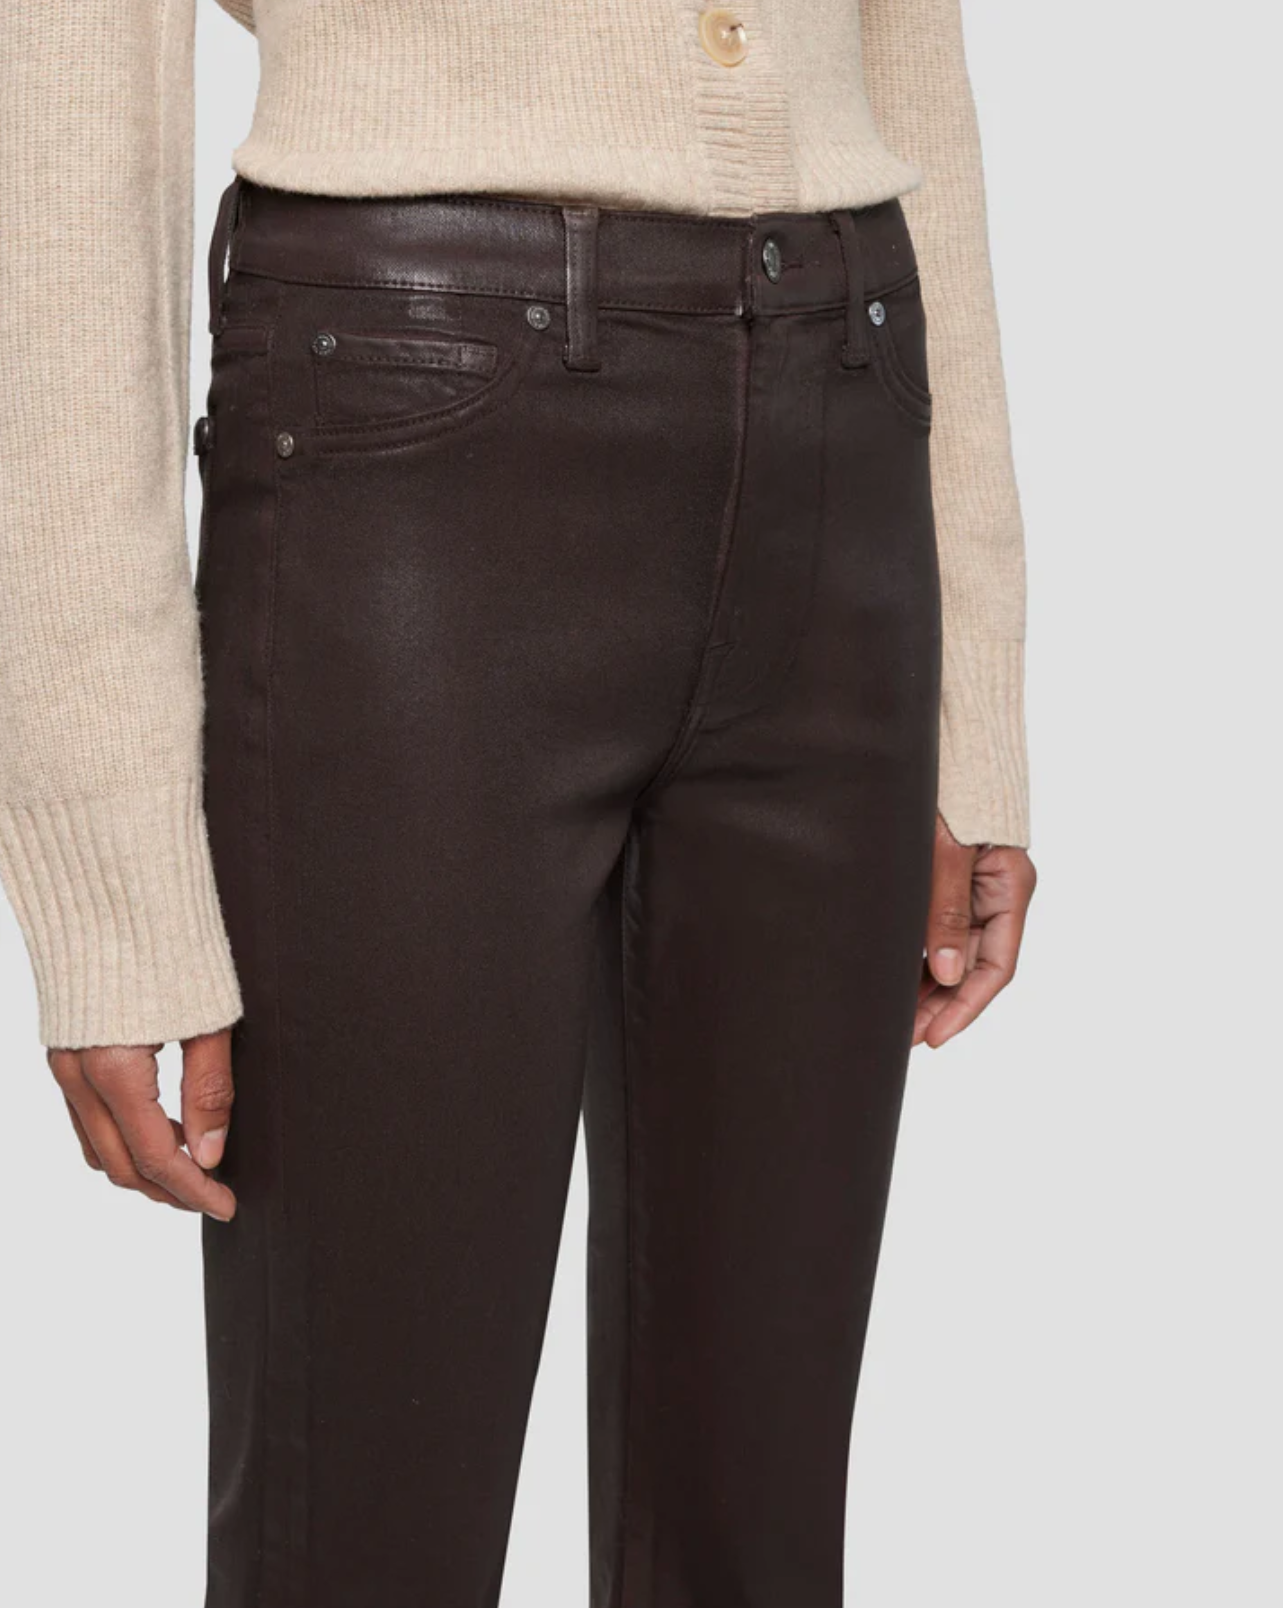 waistline close up of 7 for all mankind's high waist slim kick coated pant in chocolate brown